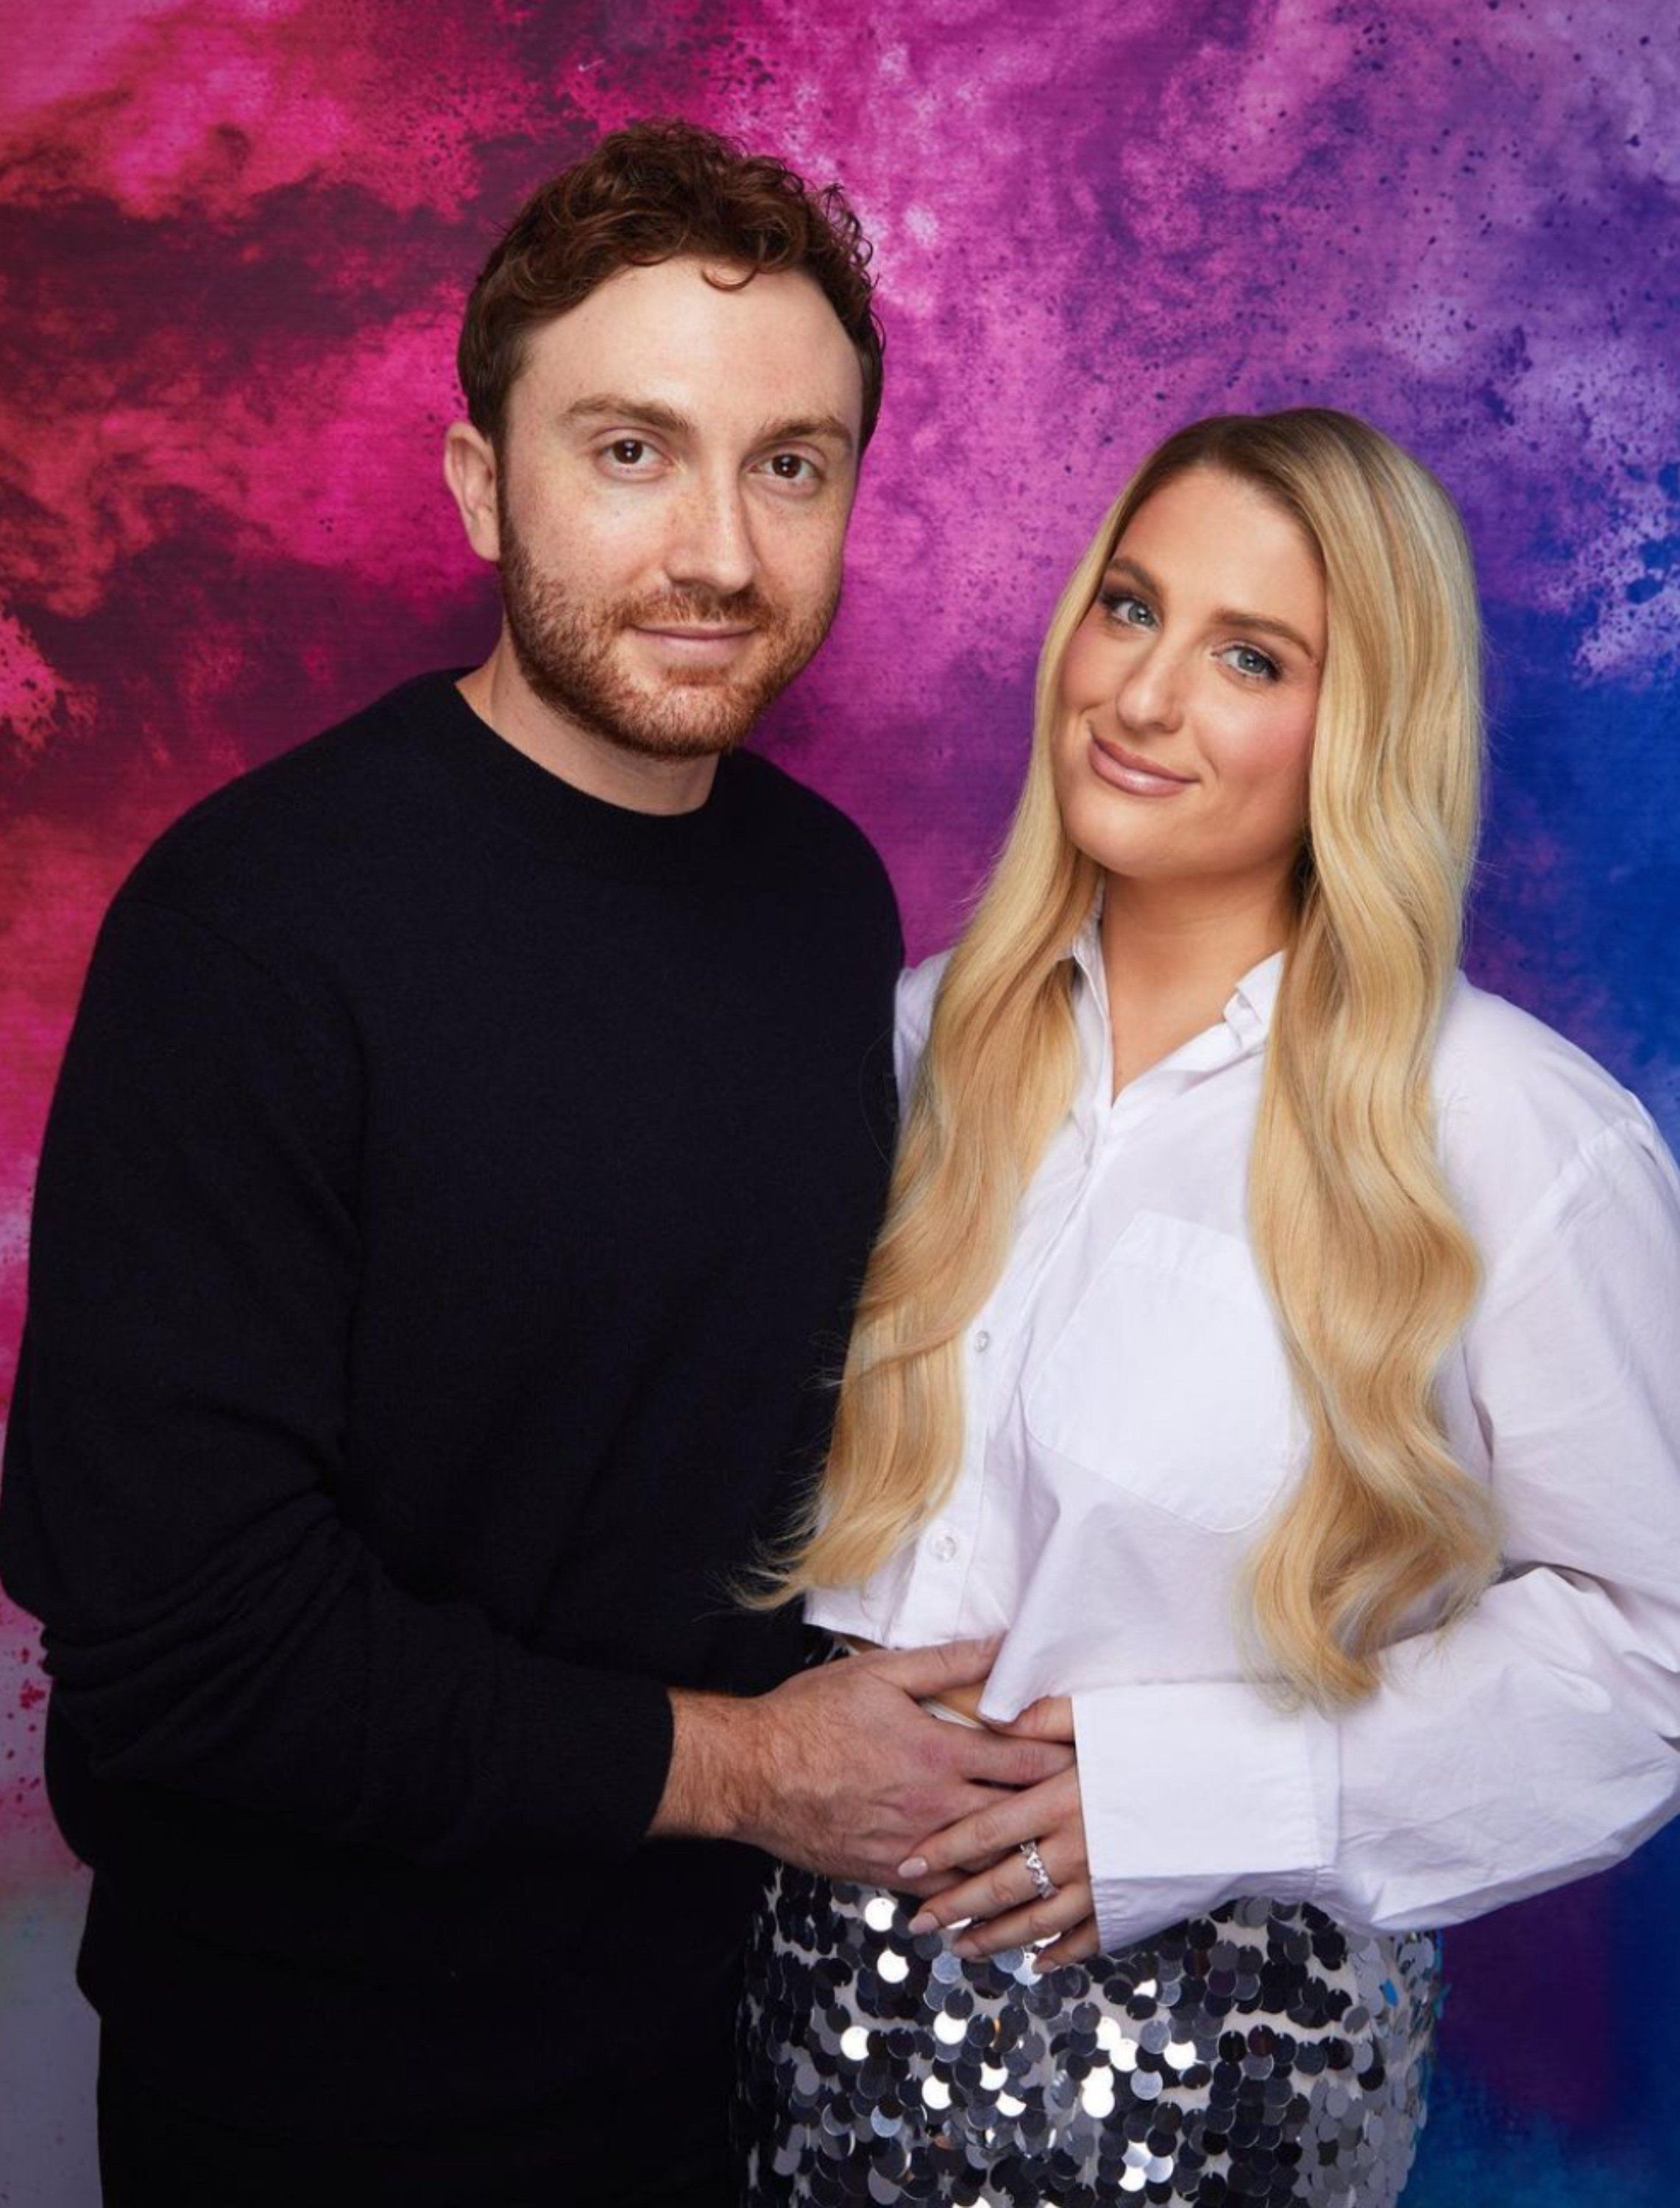 Meghan Trainor and her hubby Daryl Sabara appear to have found the key to a successful marriage. Photo: @darylsabara/Instagram